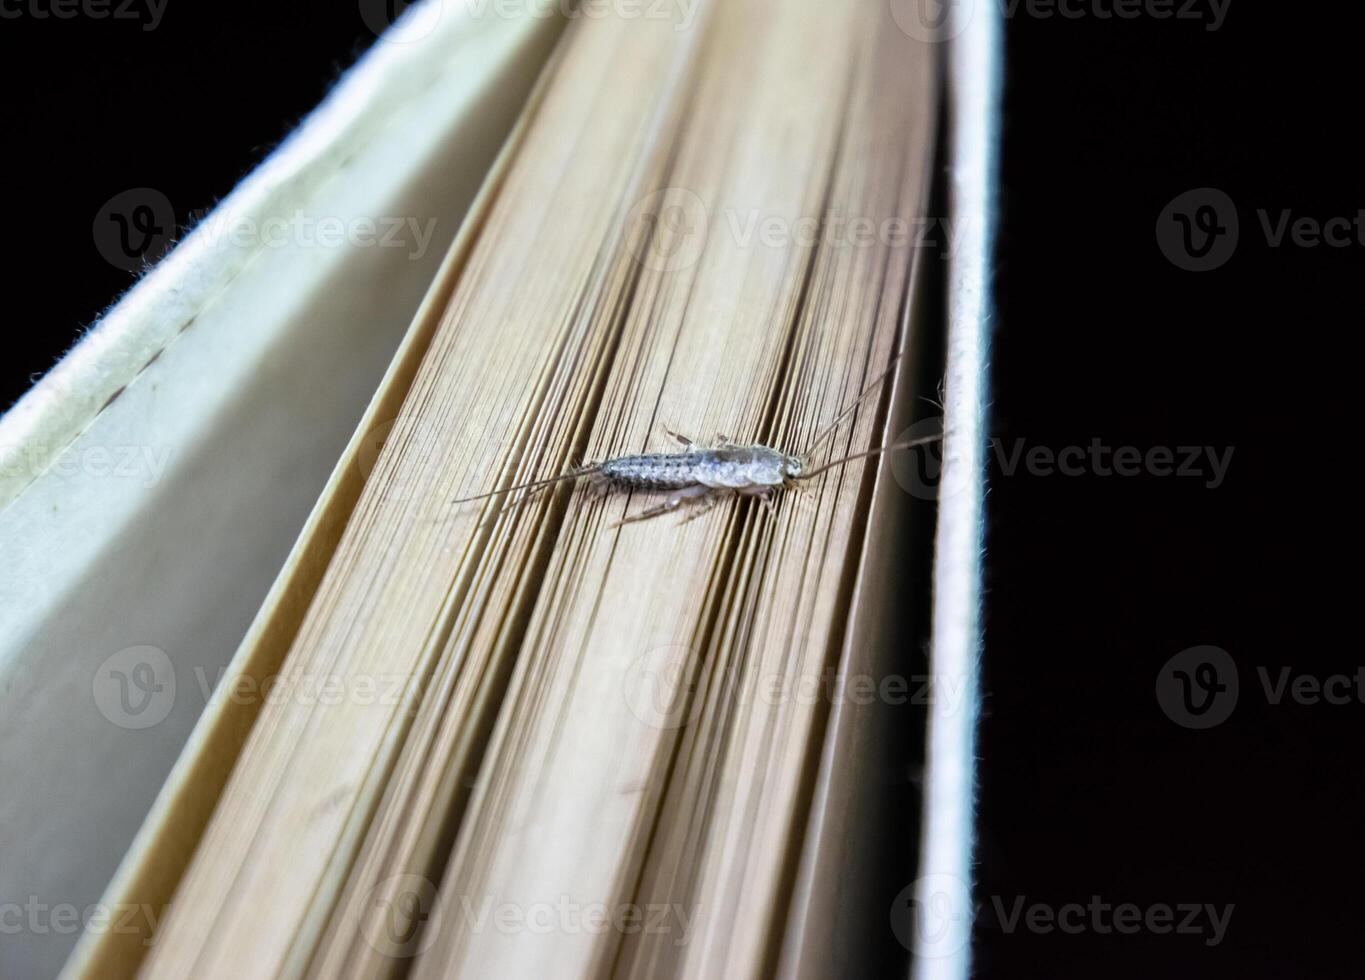 Thermobia domestica. Pest books and newspapers. Lepismatidae Insect feeding on paper - silverfish photo